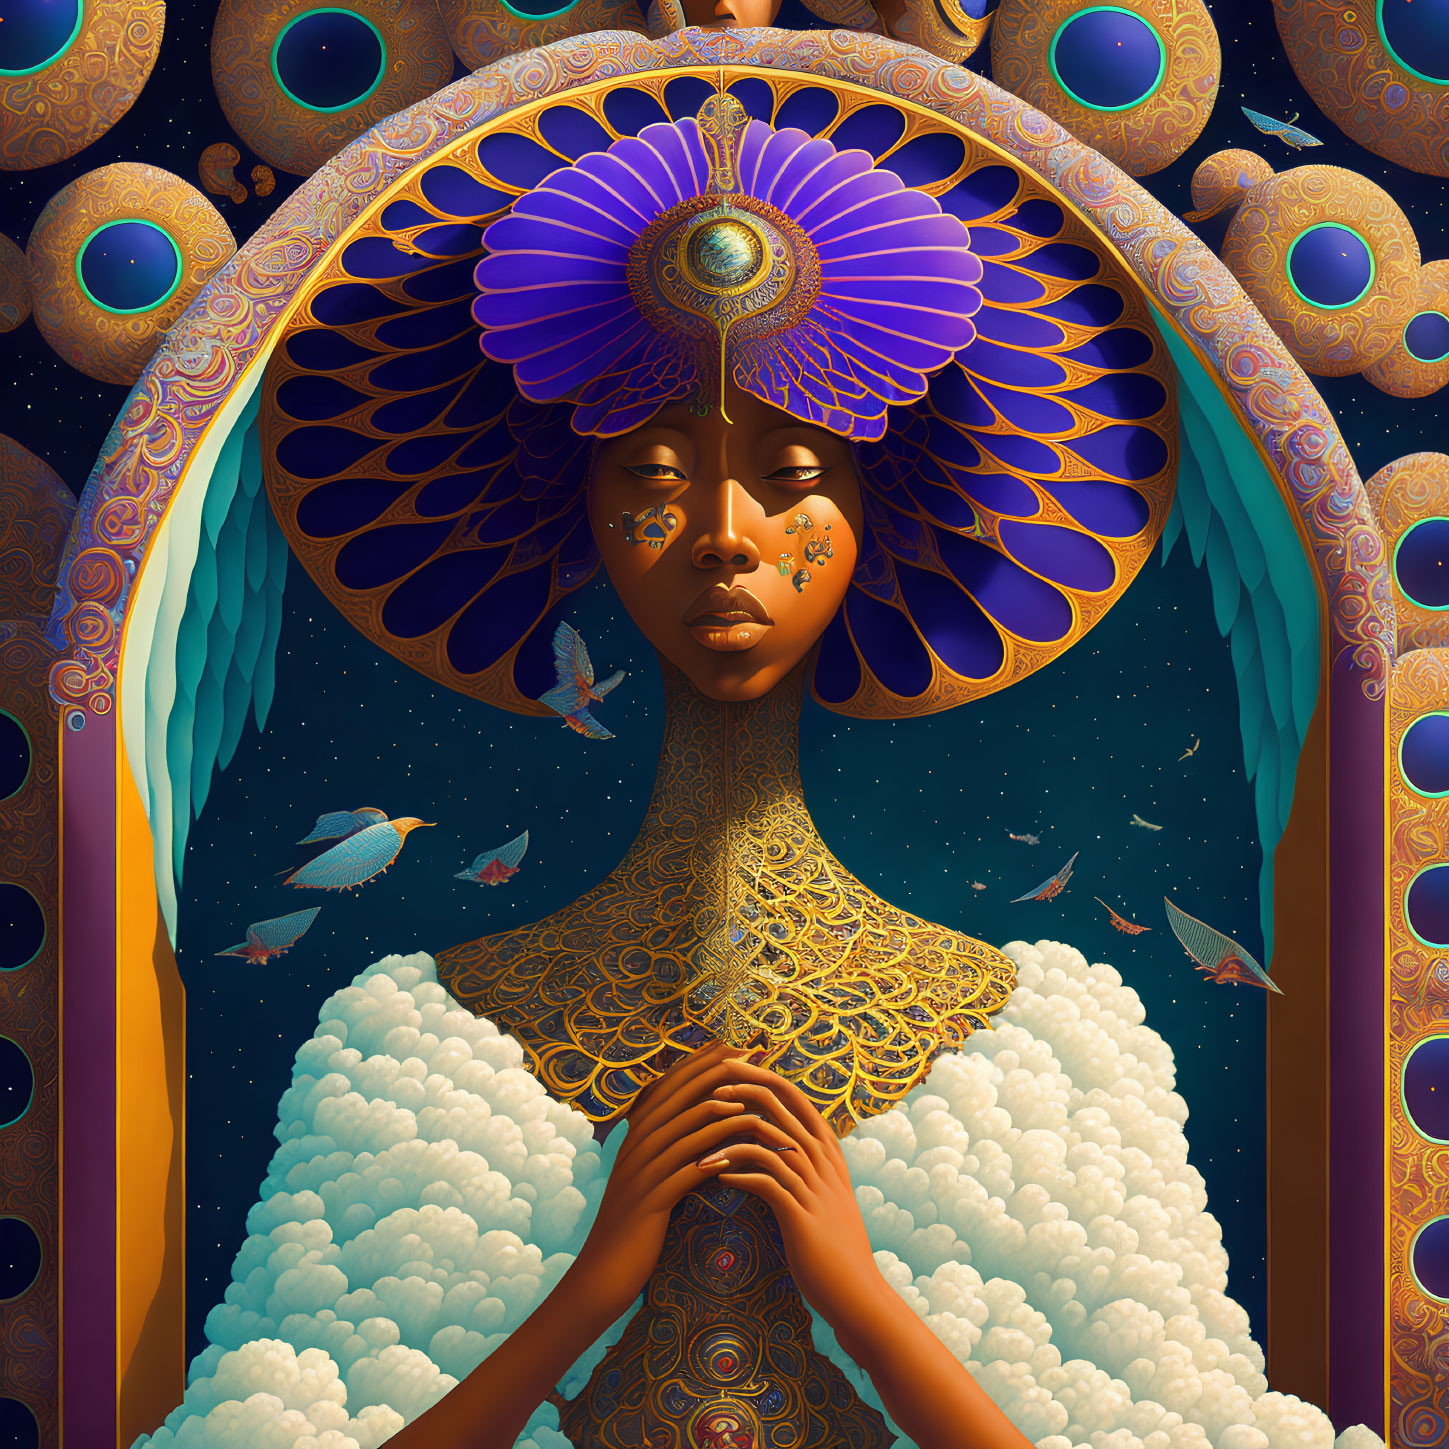 Regal figure with peacock feather headdress and celestial backdrop